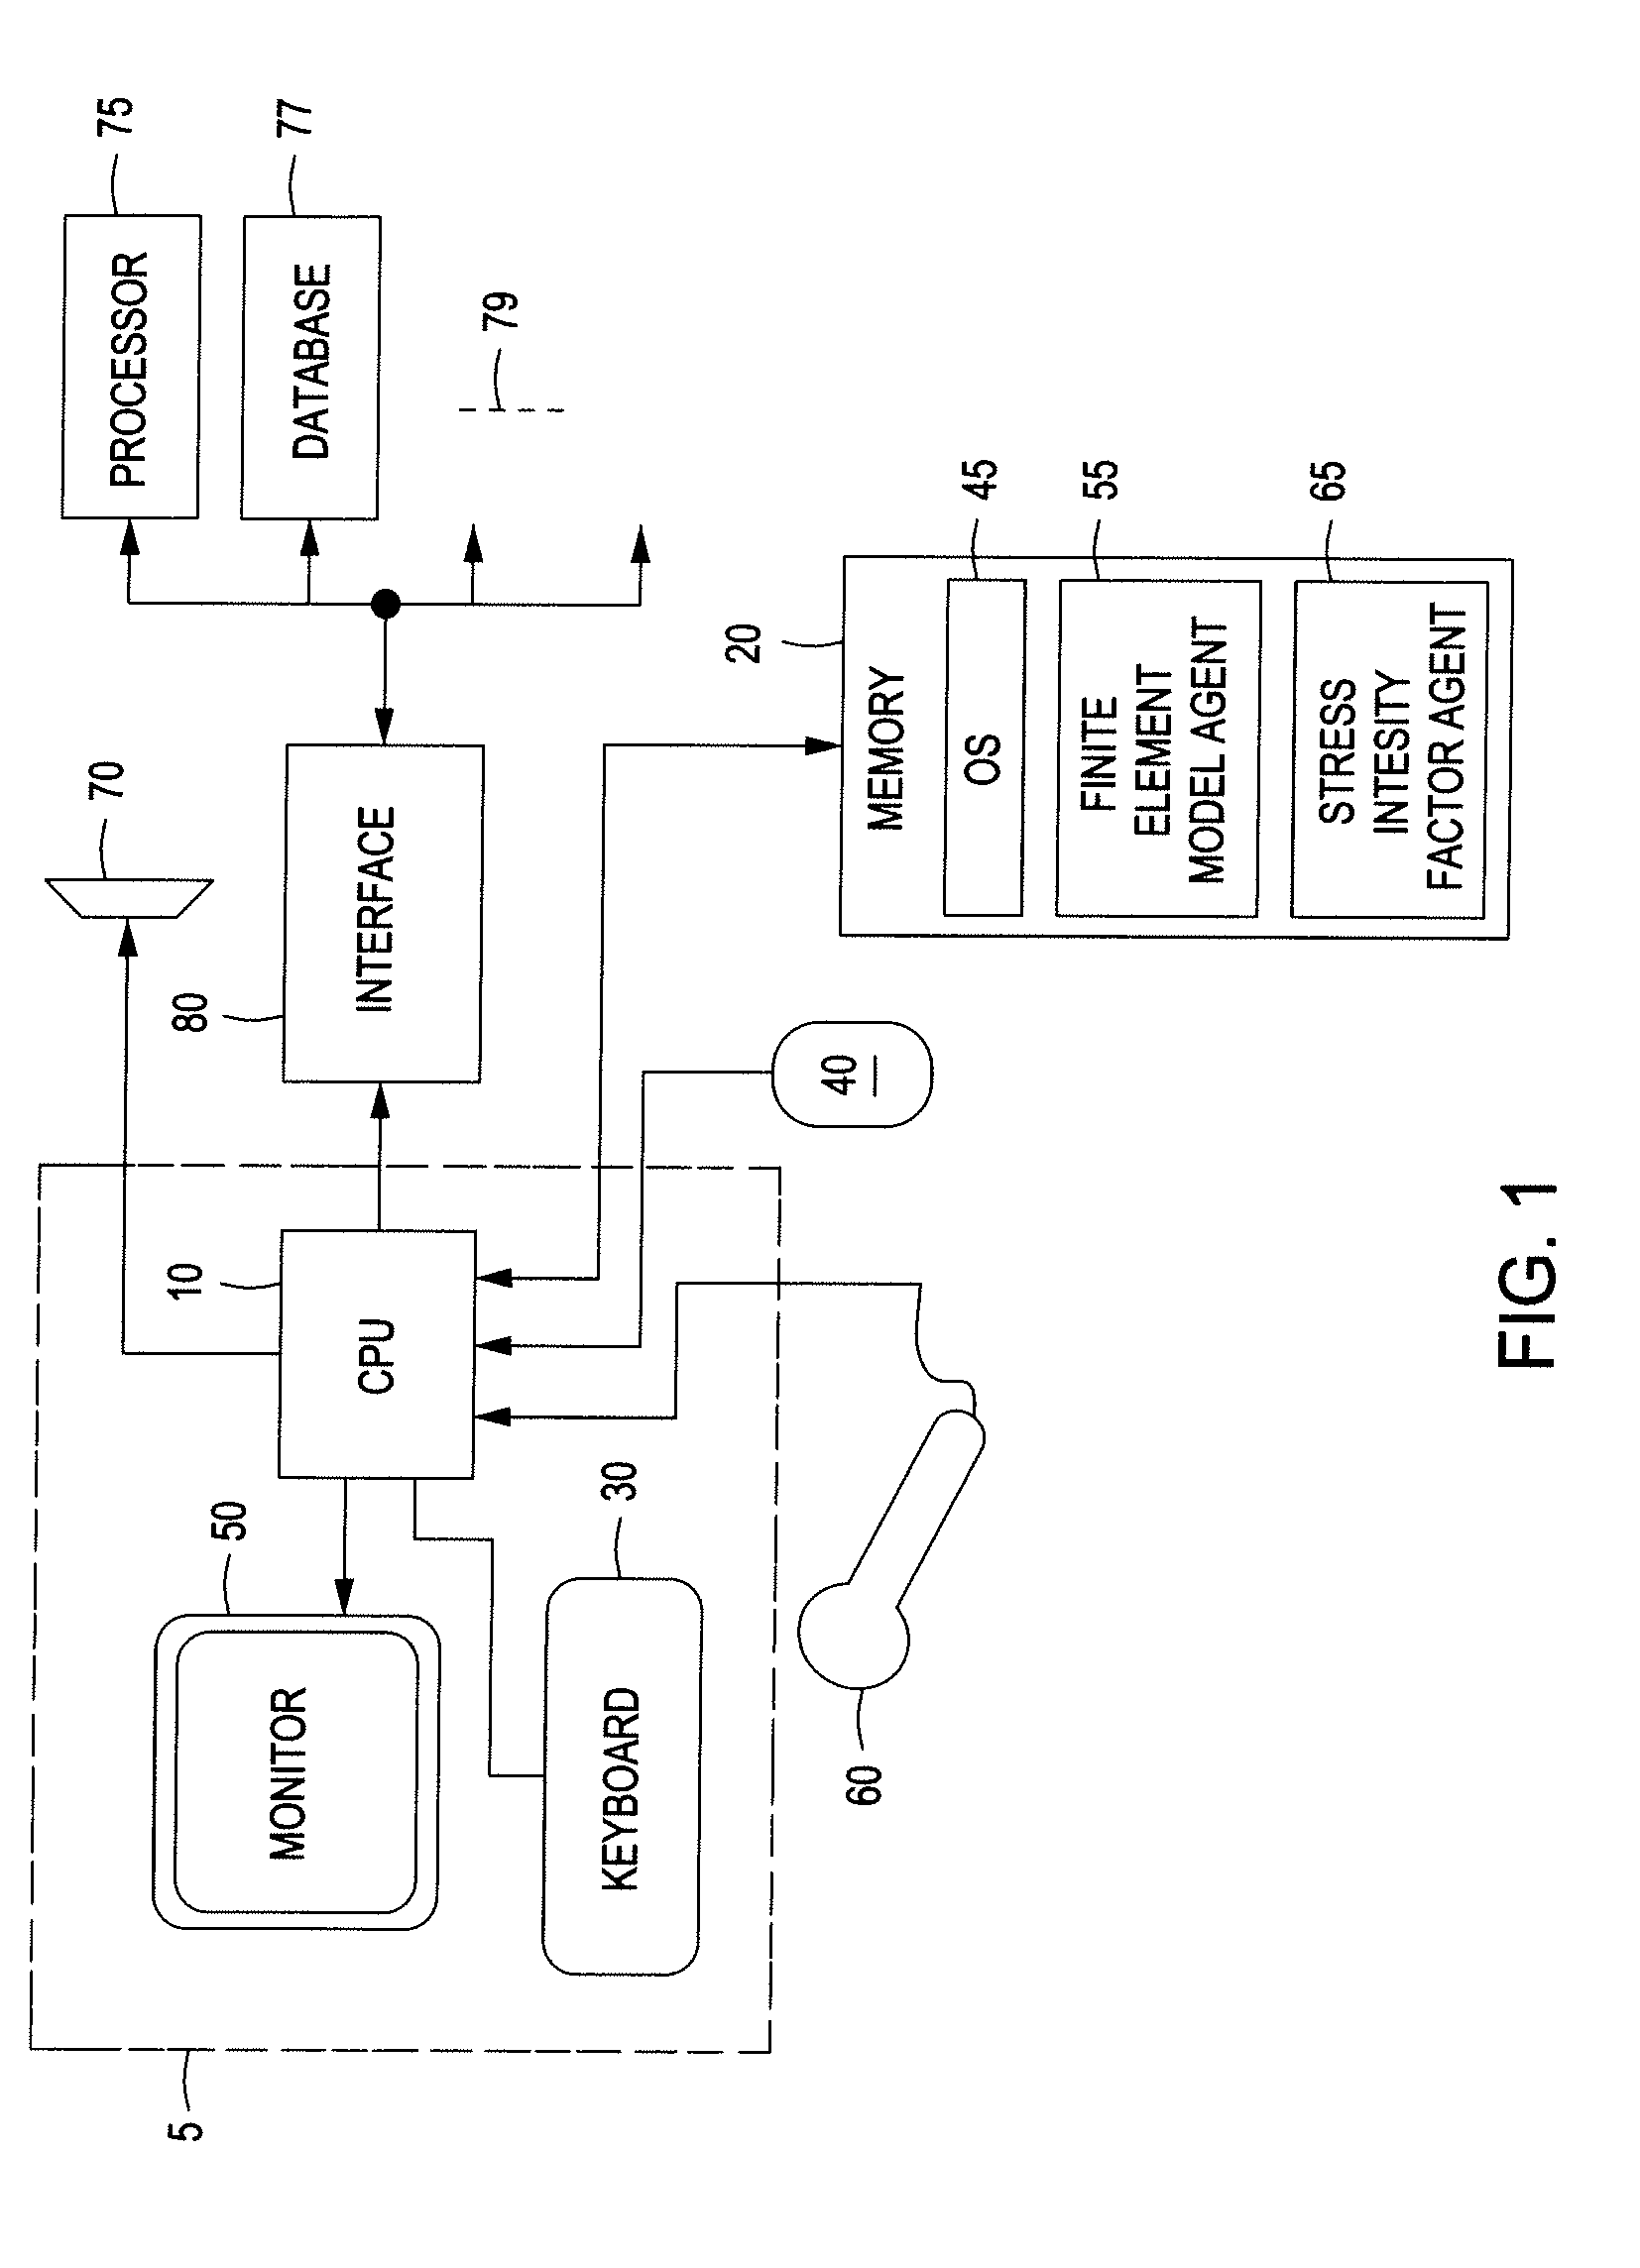 Systems and Methods for Performing Stress Intensity Factor Calculations Using Non-Singluar Finite Elements